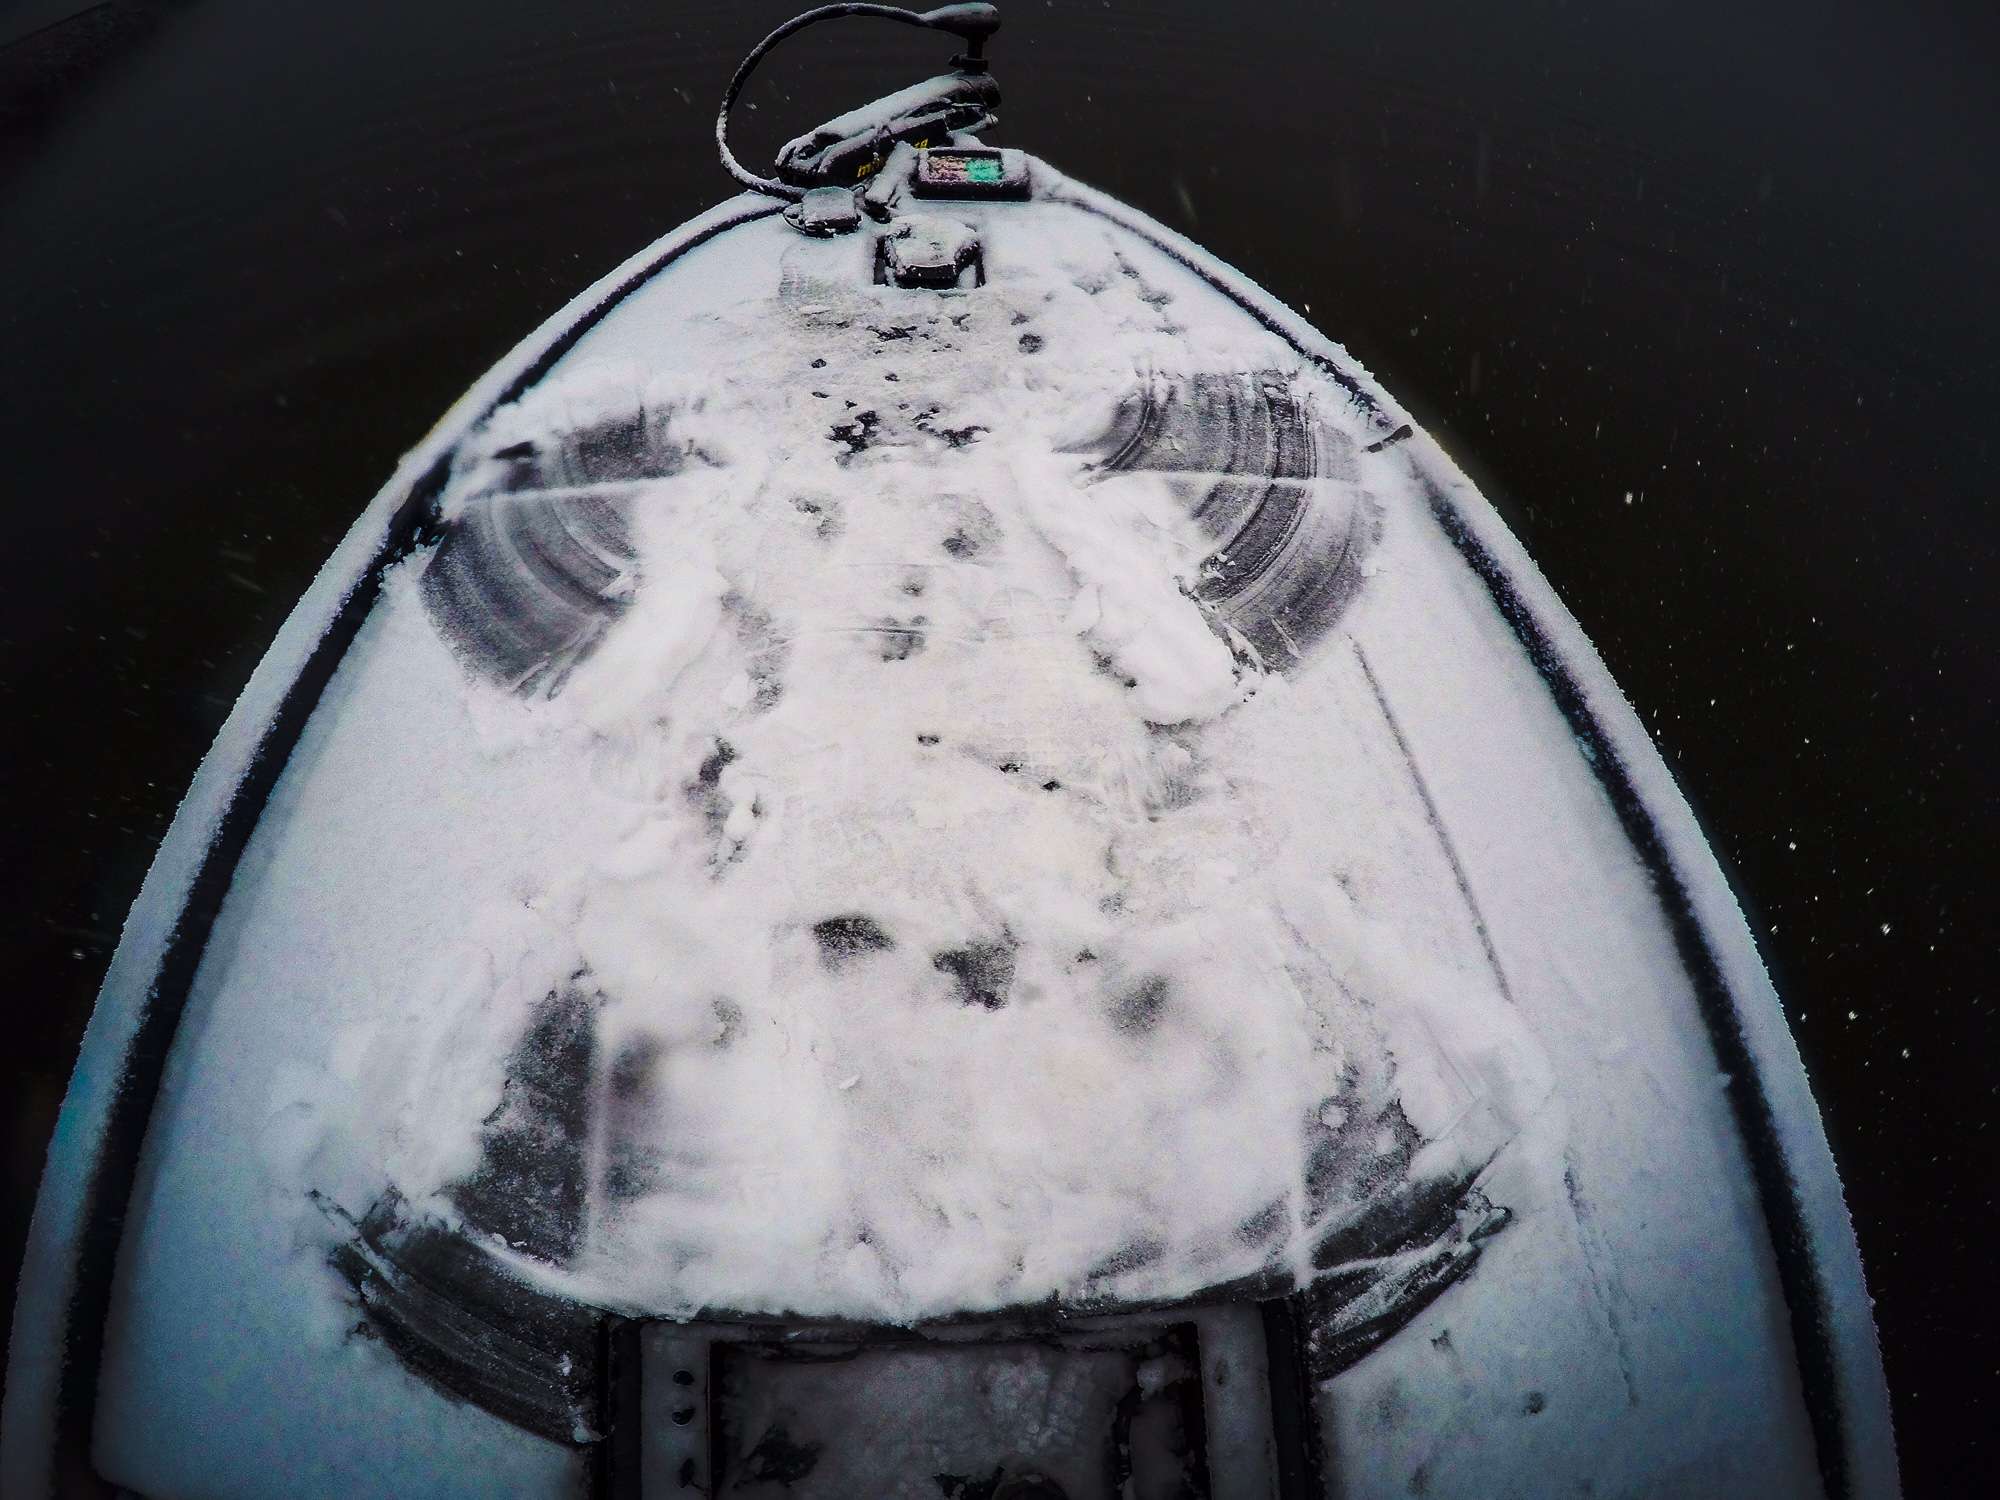 Carl Jocumsen made a snow angel on his boat.